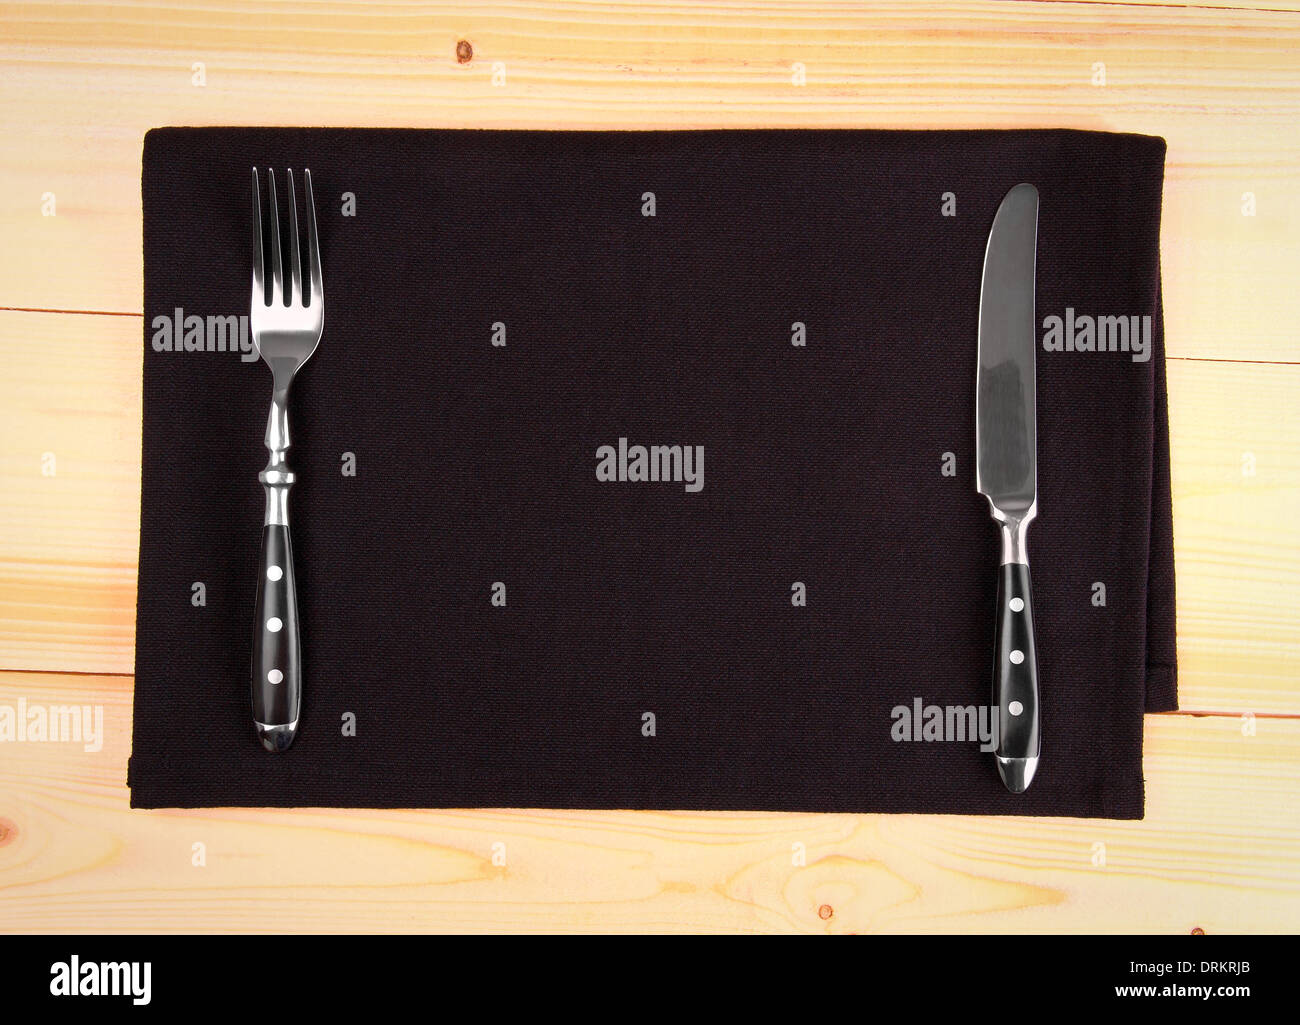 Fine cutlery on black placemat as menu board, top view Stock Photo